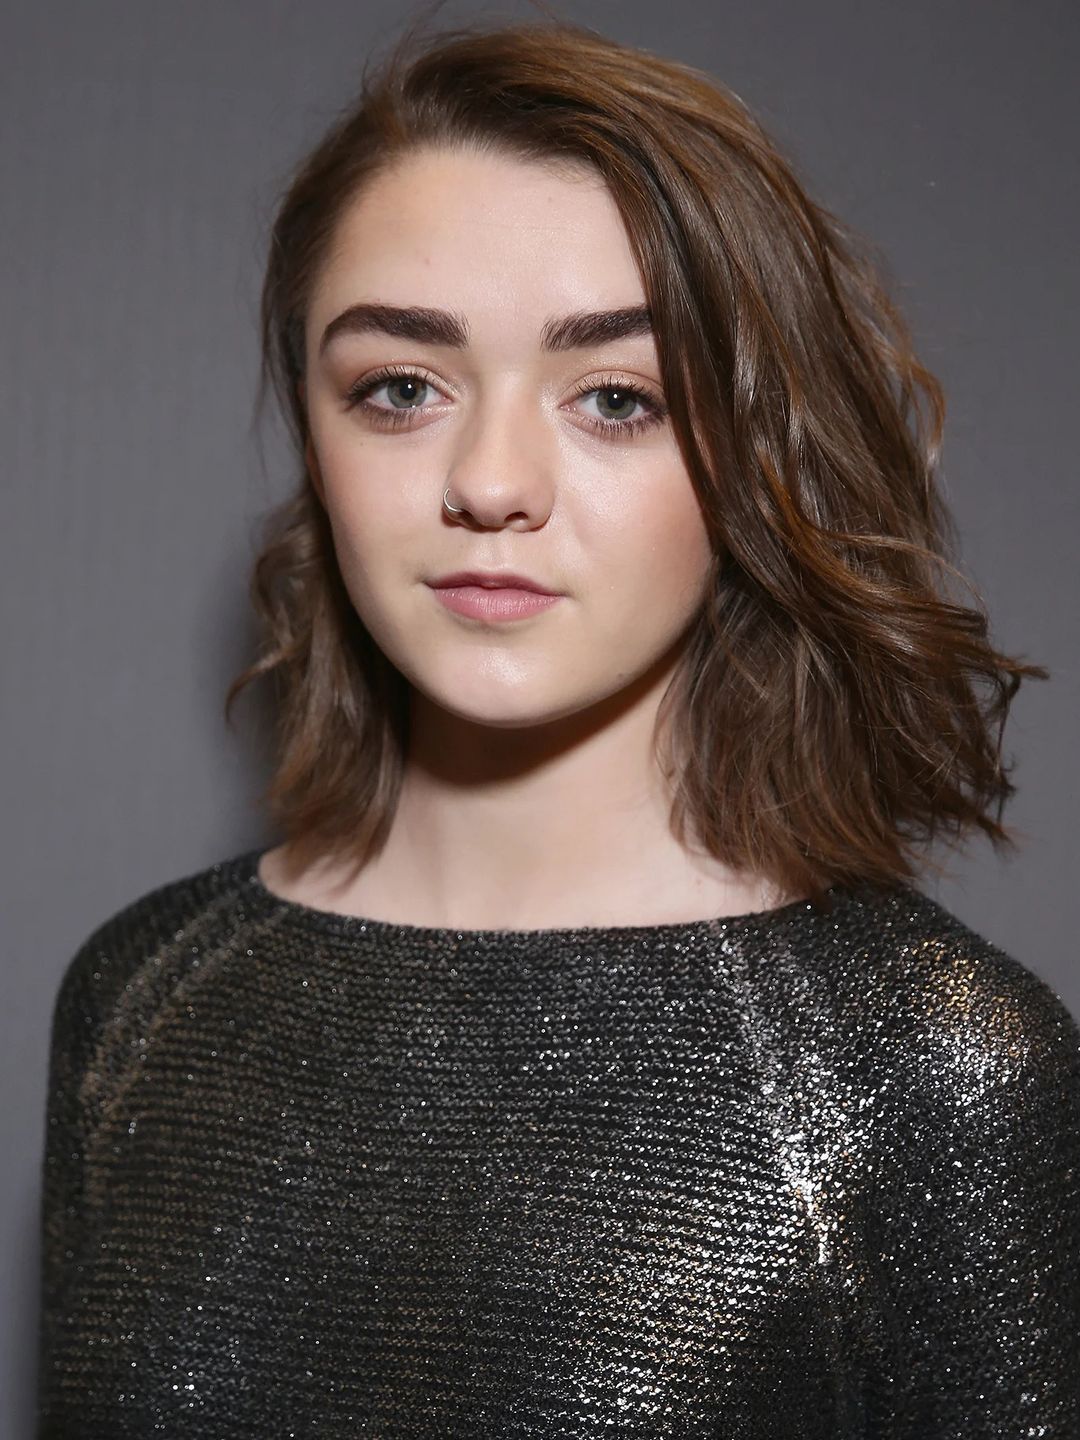 Maisie Williams does she have kids